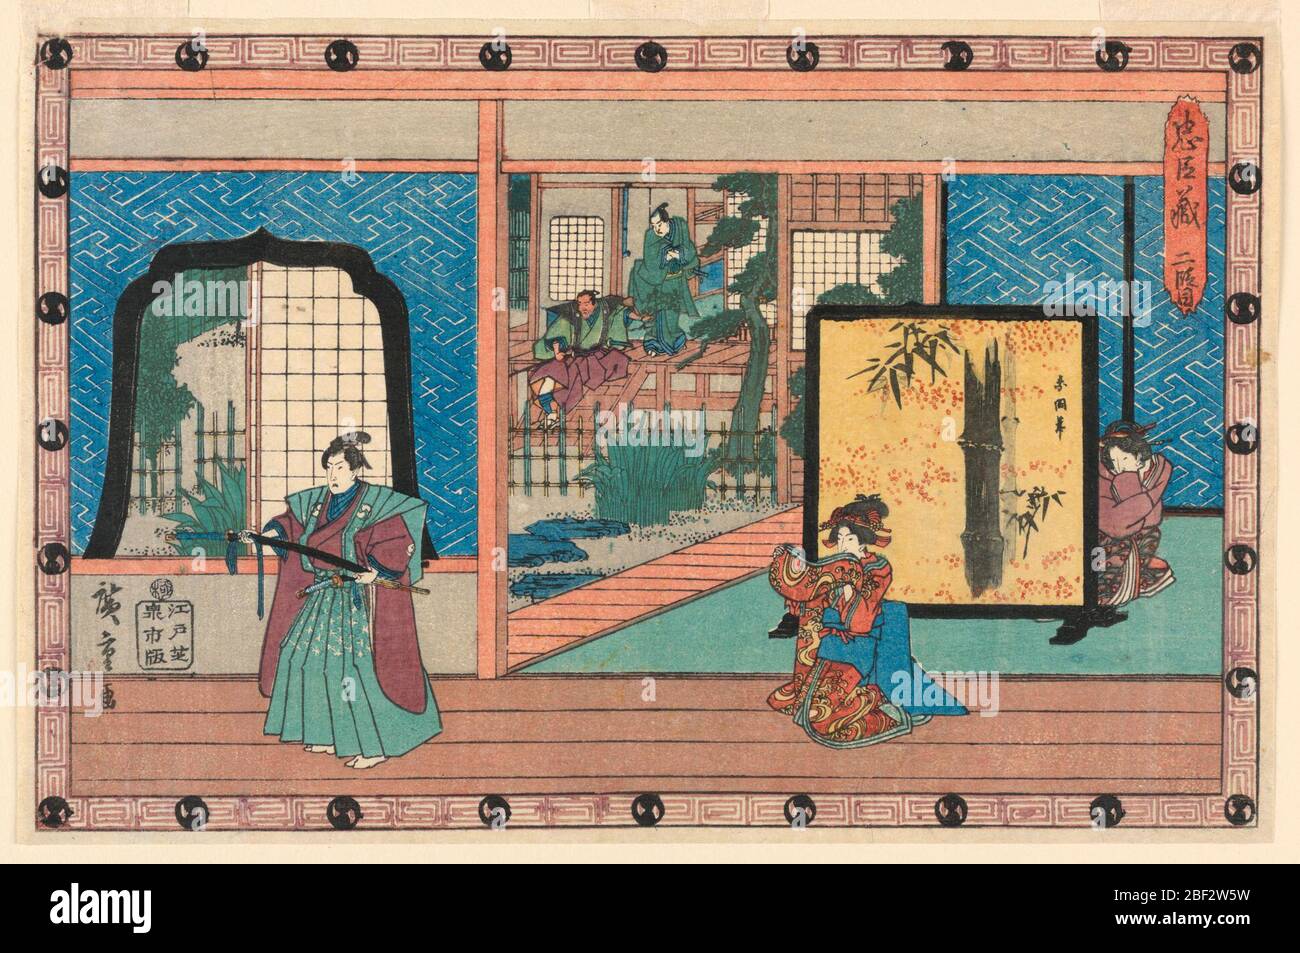 Stage Design Act II for the Chushingura. Horizontal format. A stage set shows the interior of a house, with the figure of a samurai and kneeling woman. In the right middle distance, a woman kneels behind a painted screen. Garden with two figures on a porch, left background. Title, upper right. Stock Photo